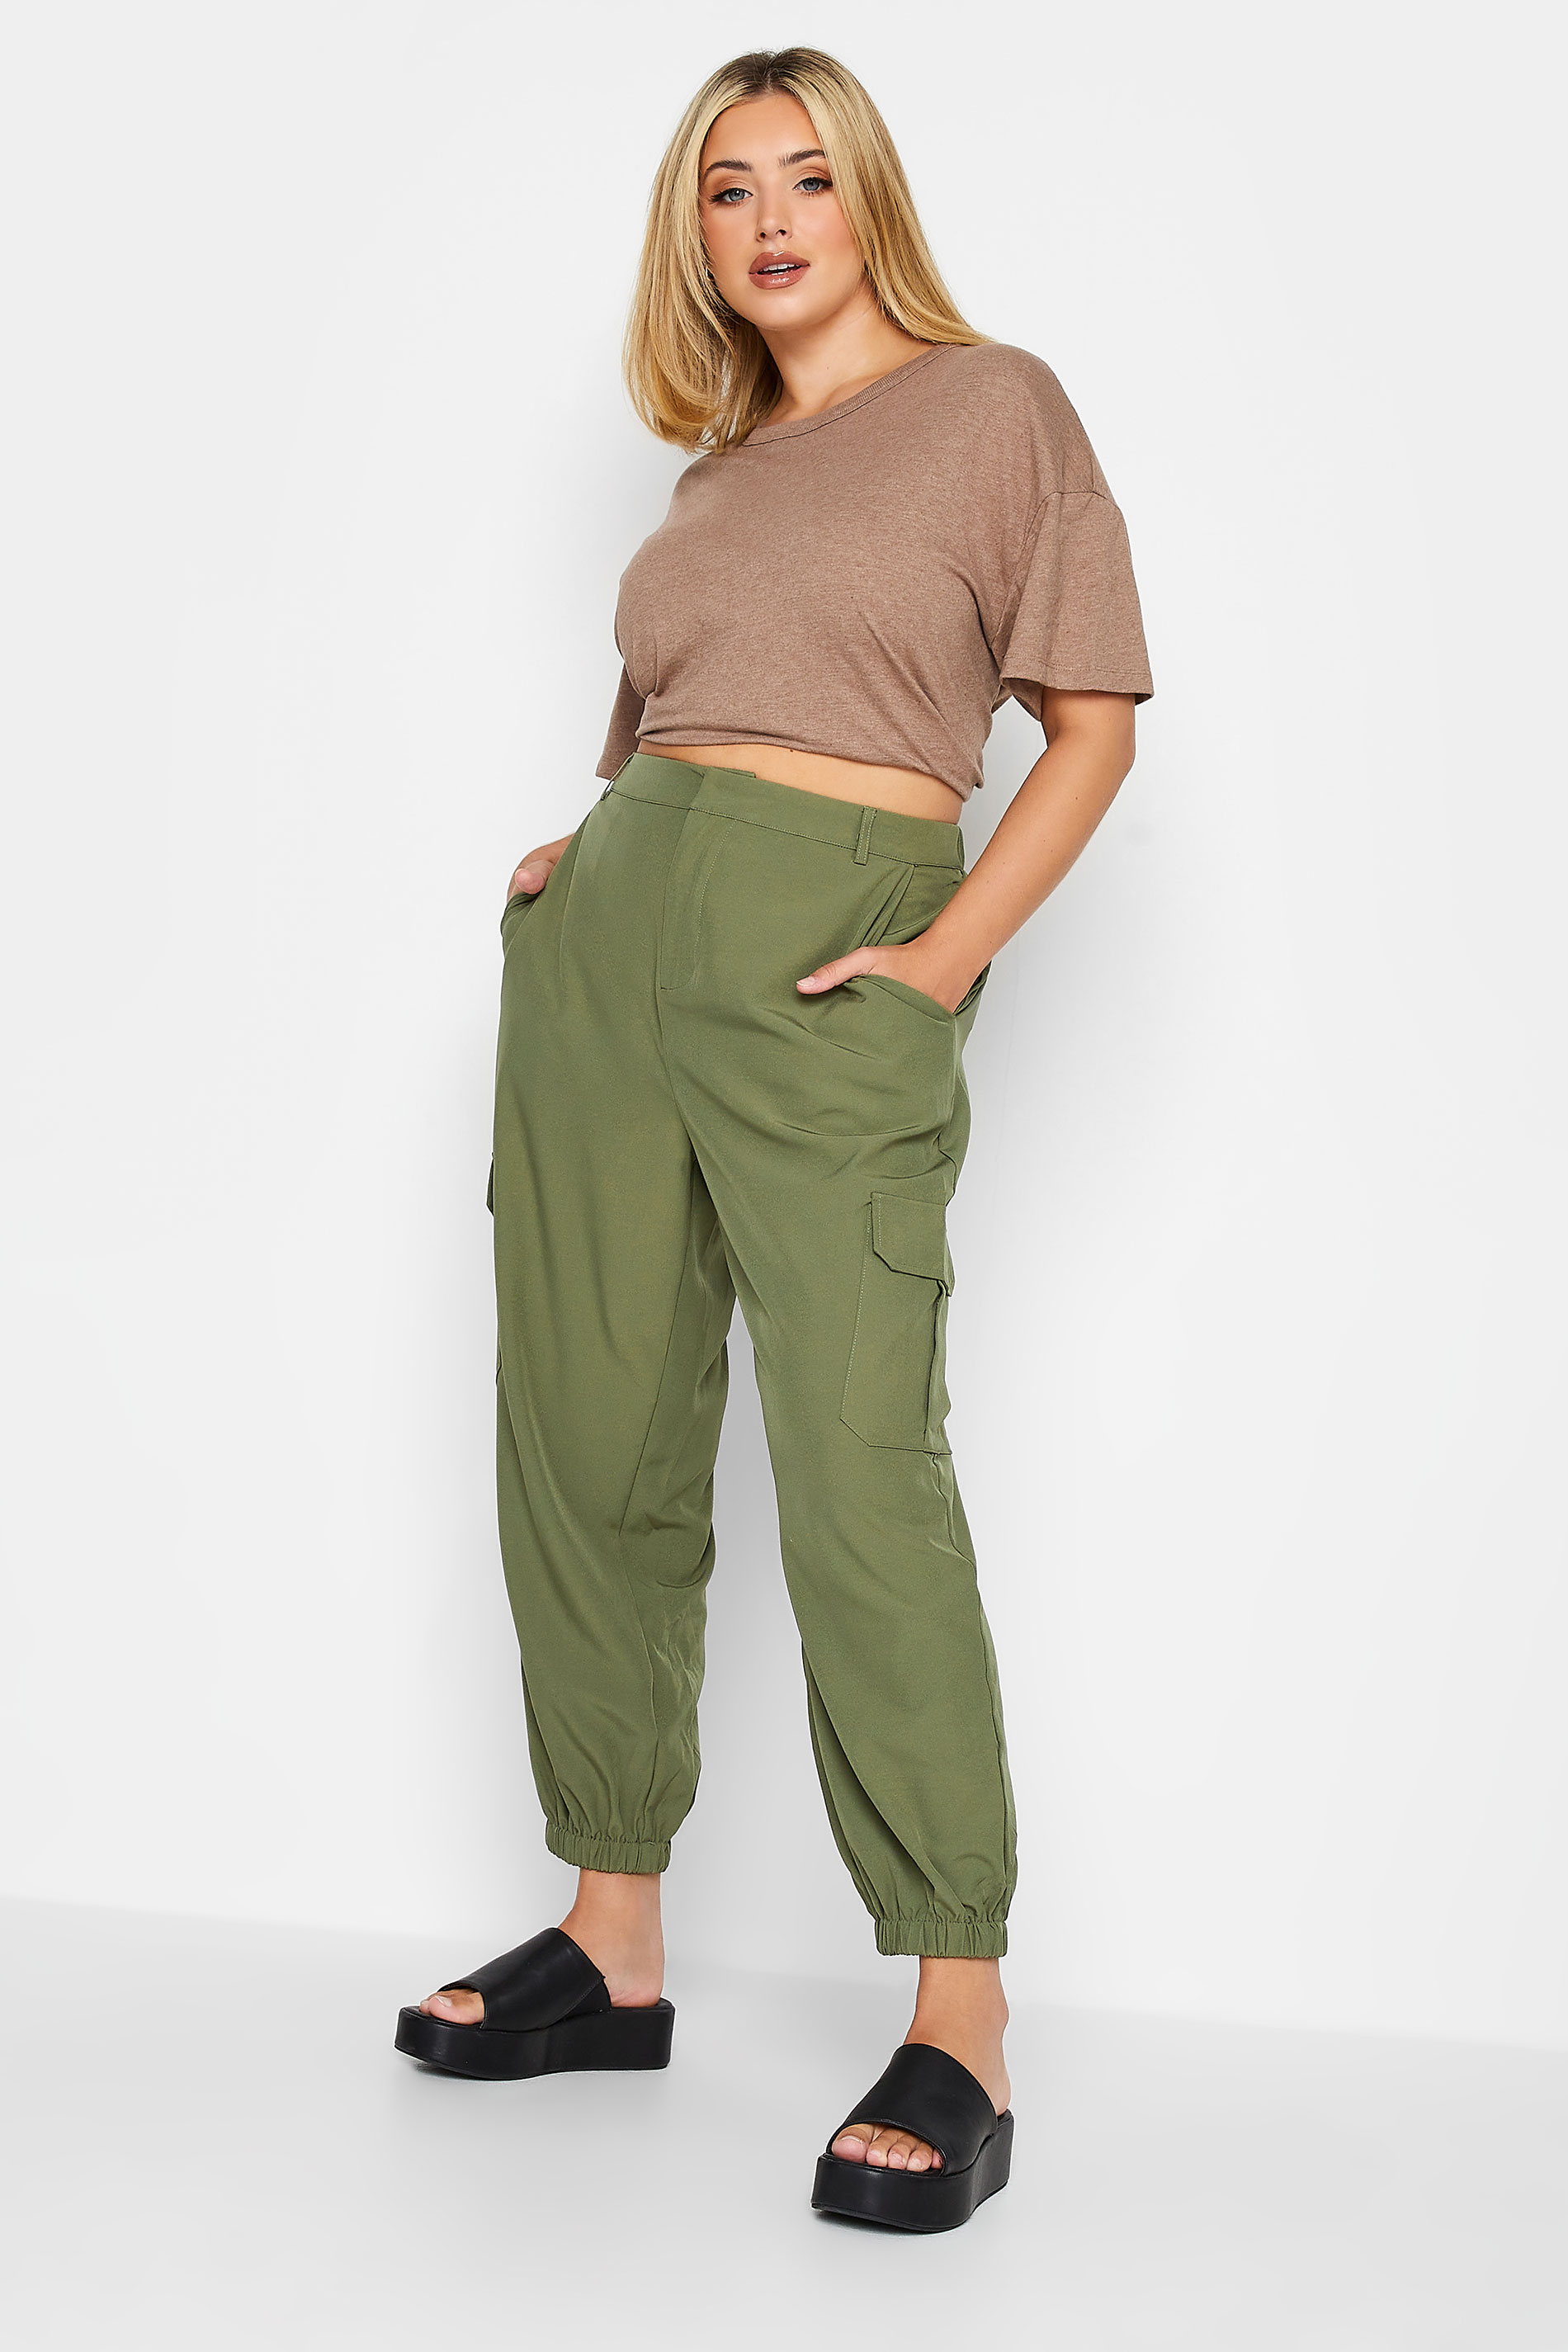 YOURS PETITE Curve Khaki Green Cargo Trousers | Yours Clothing